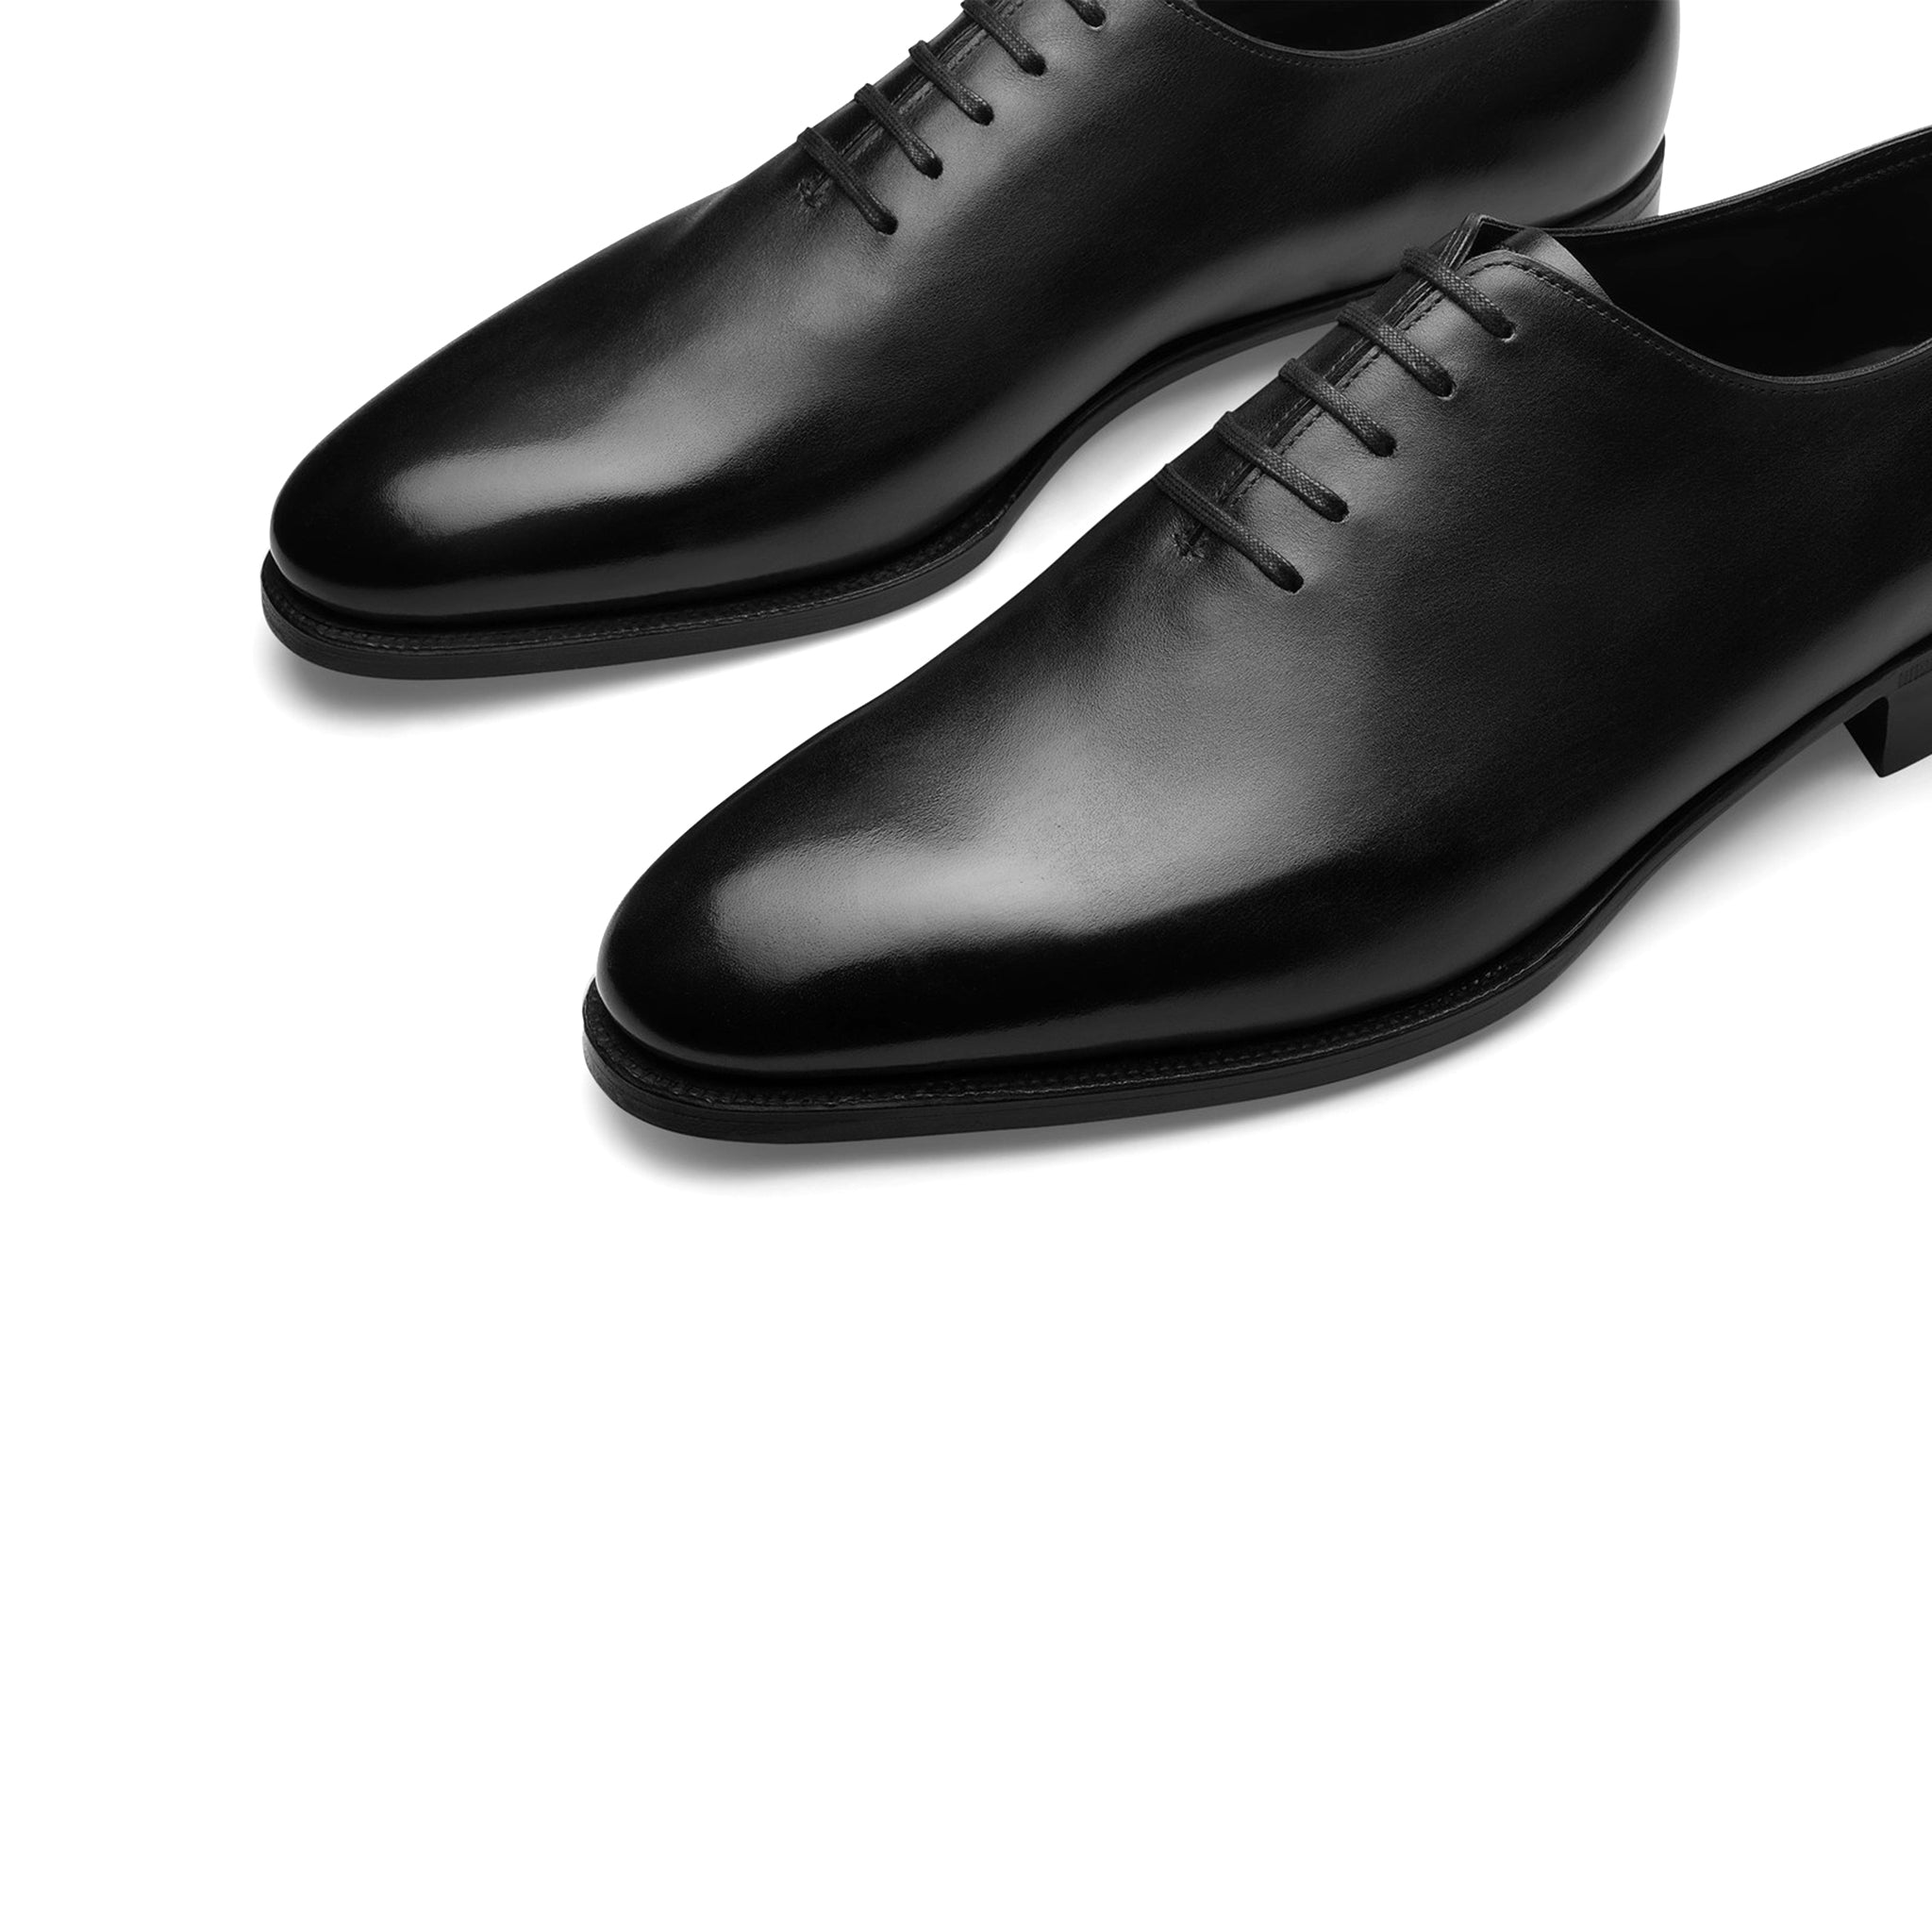 Handcrafted Genuine Leather Oxford Shoes